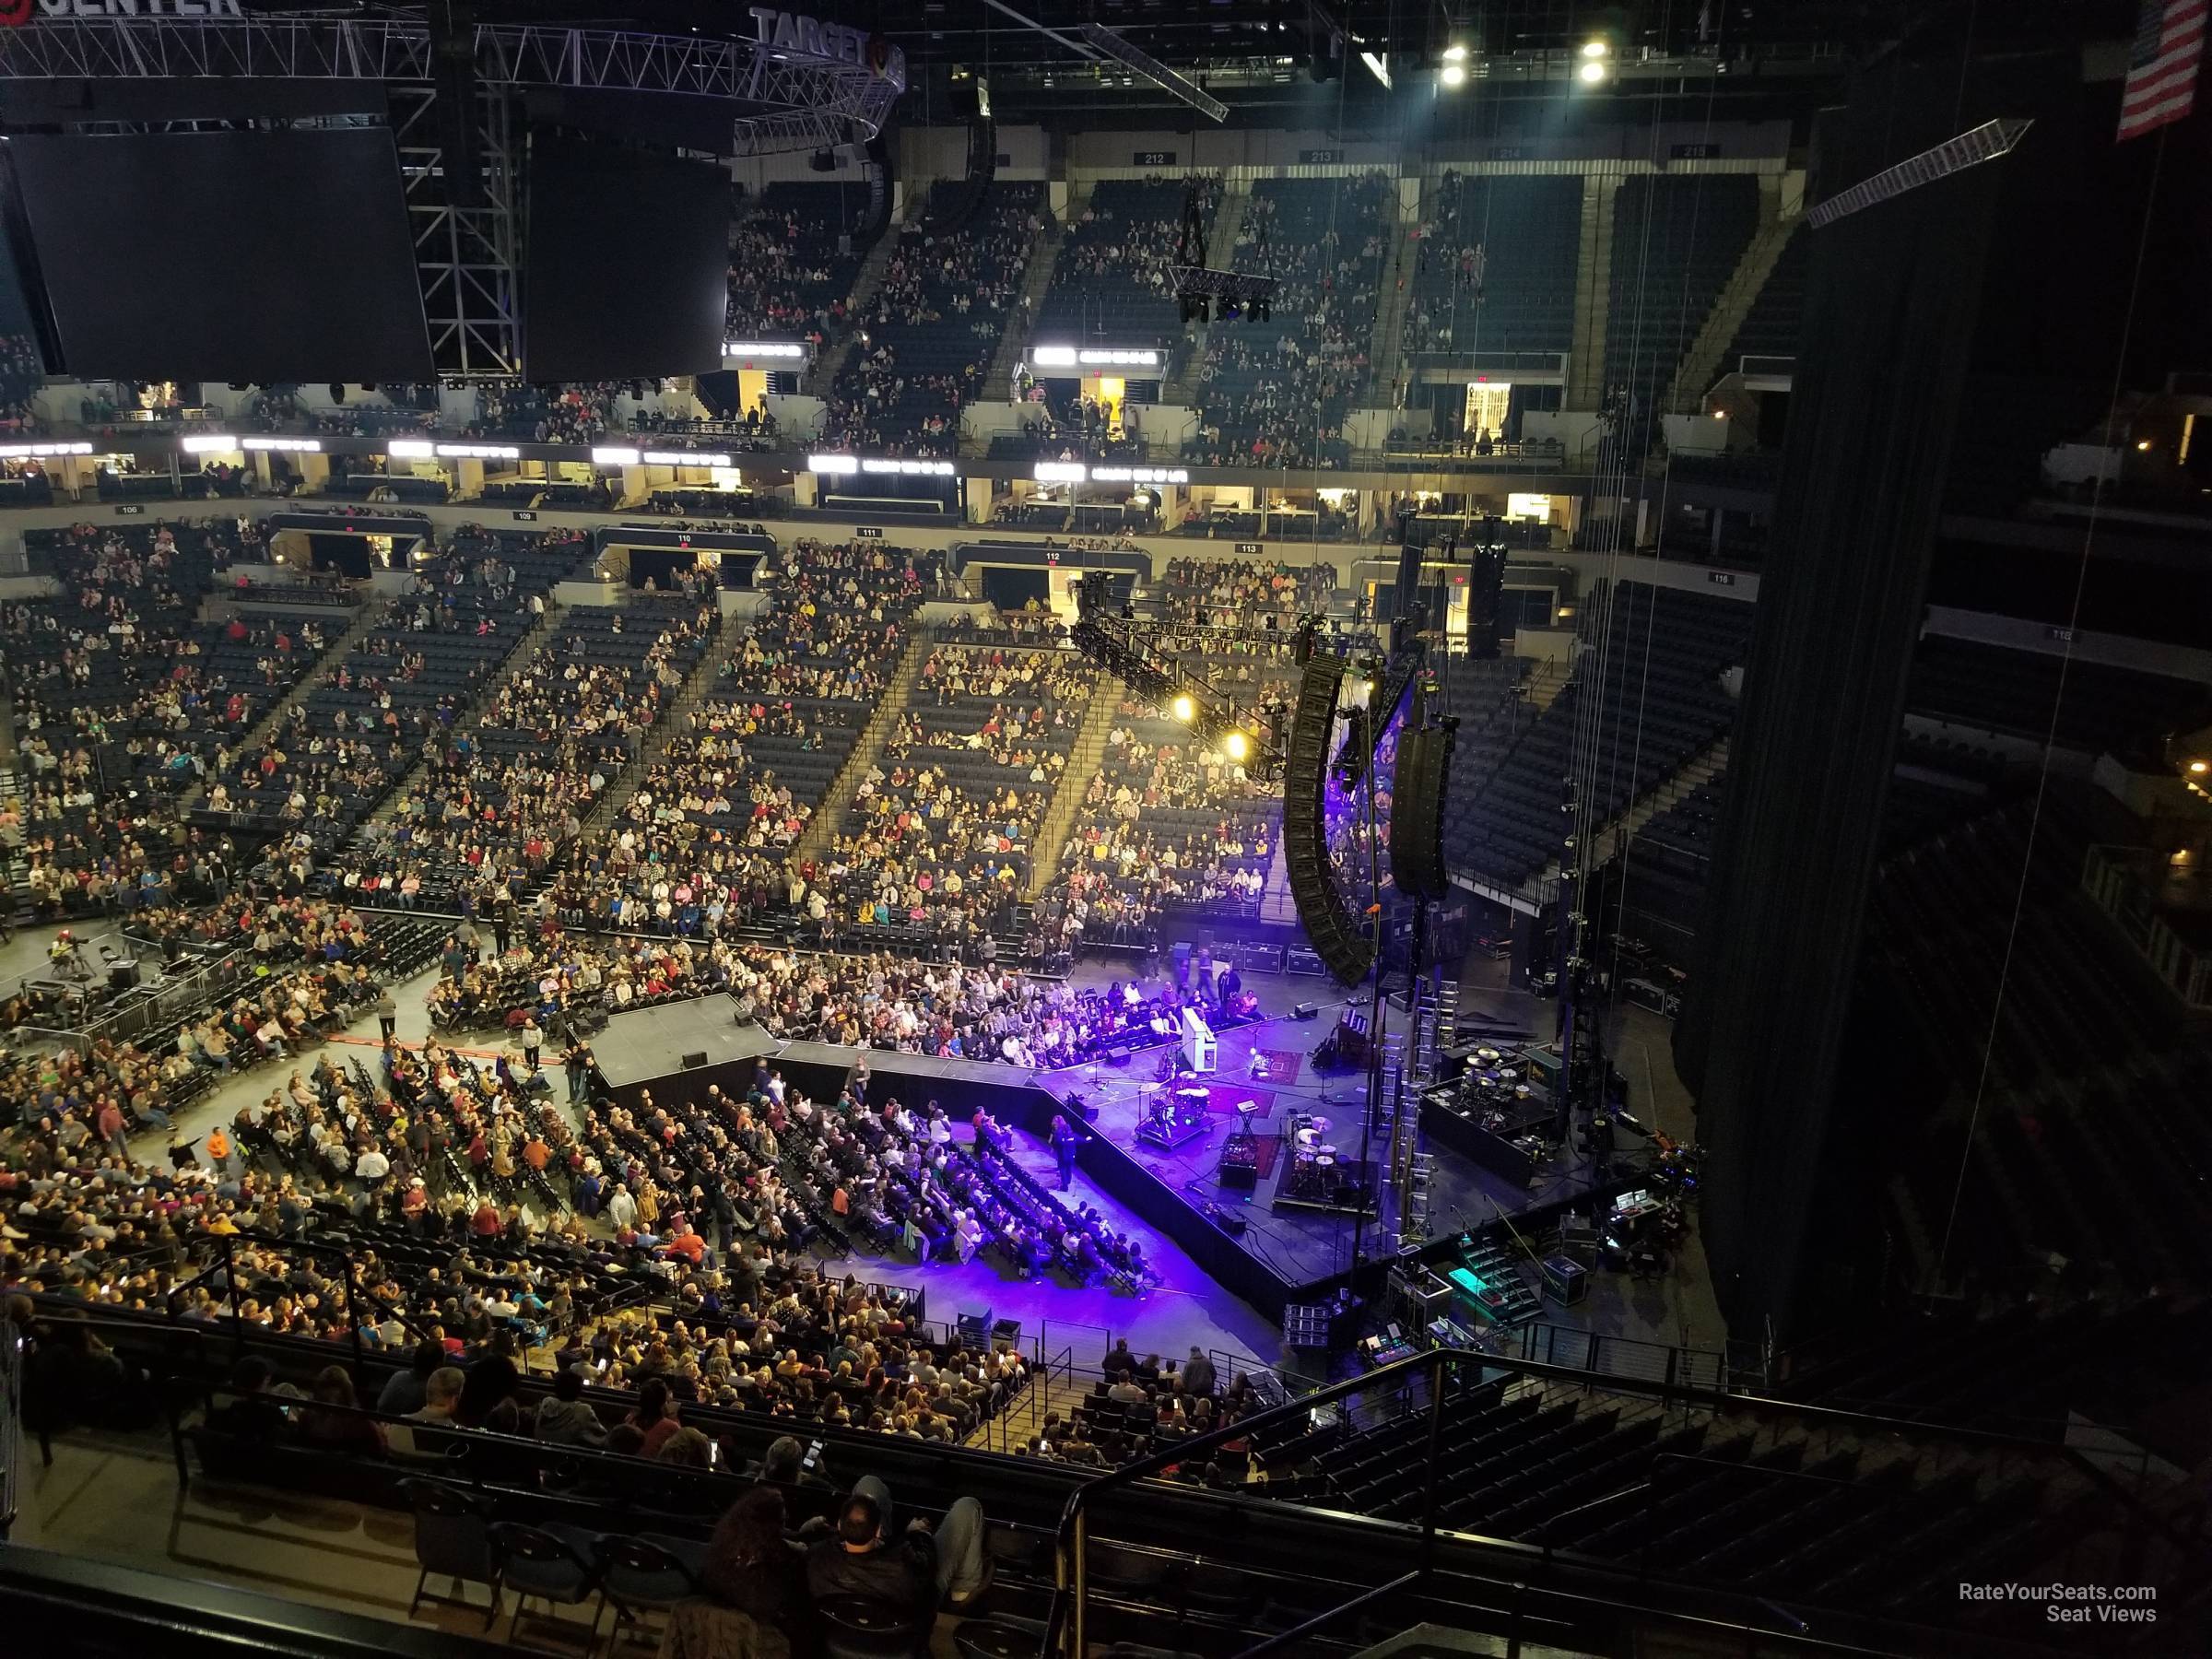 Target Center Section 228 Concert Seating - RateYourSeats.com